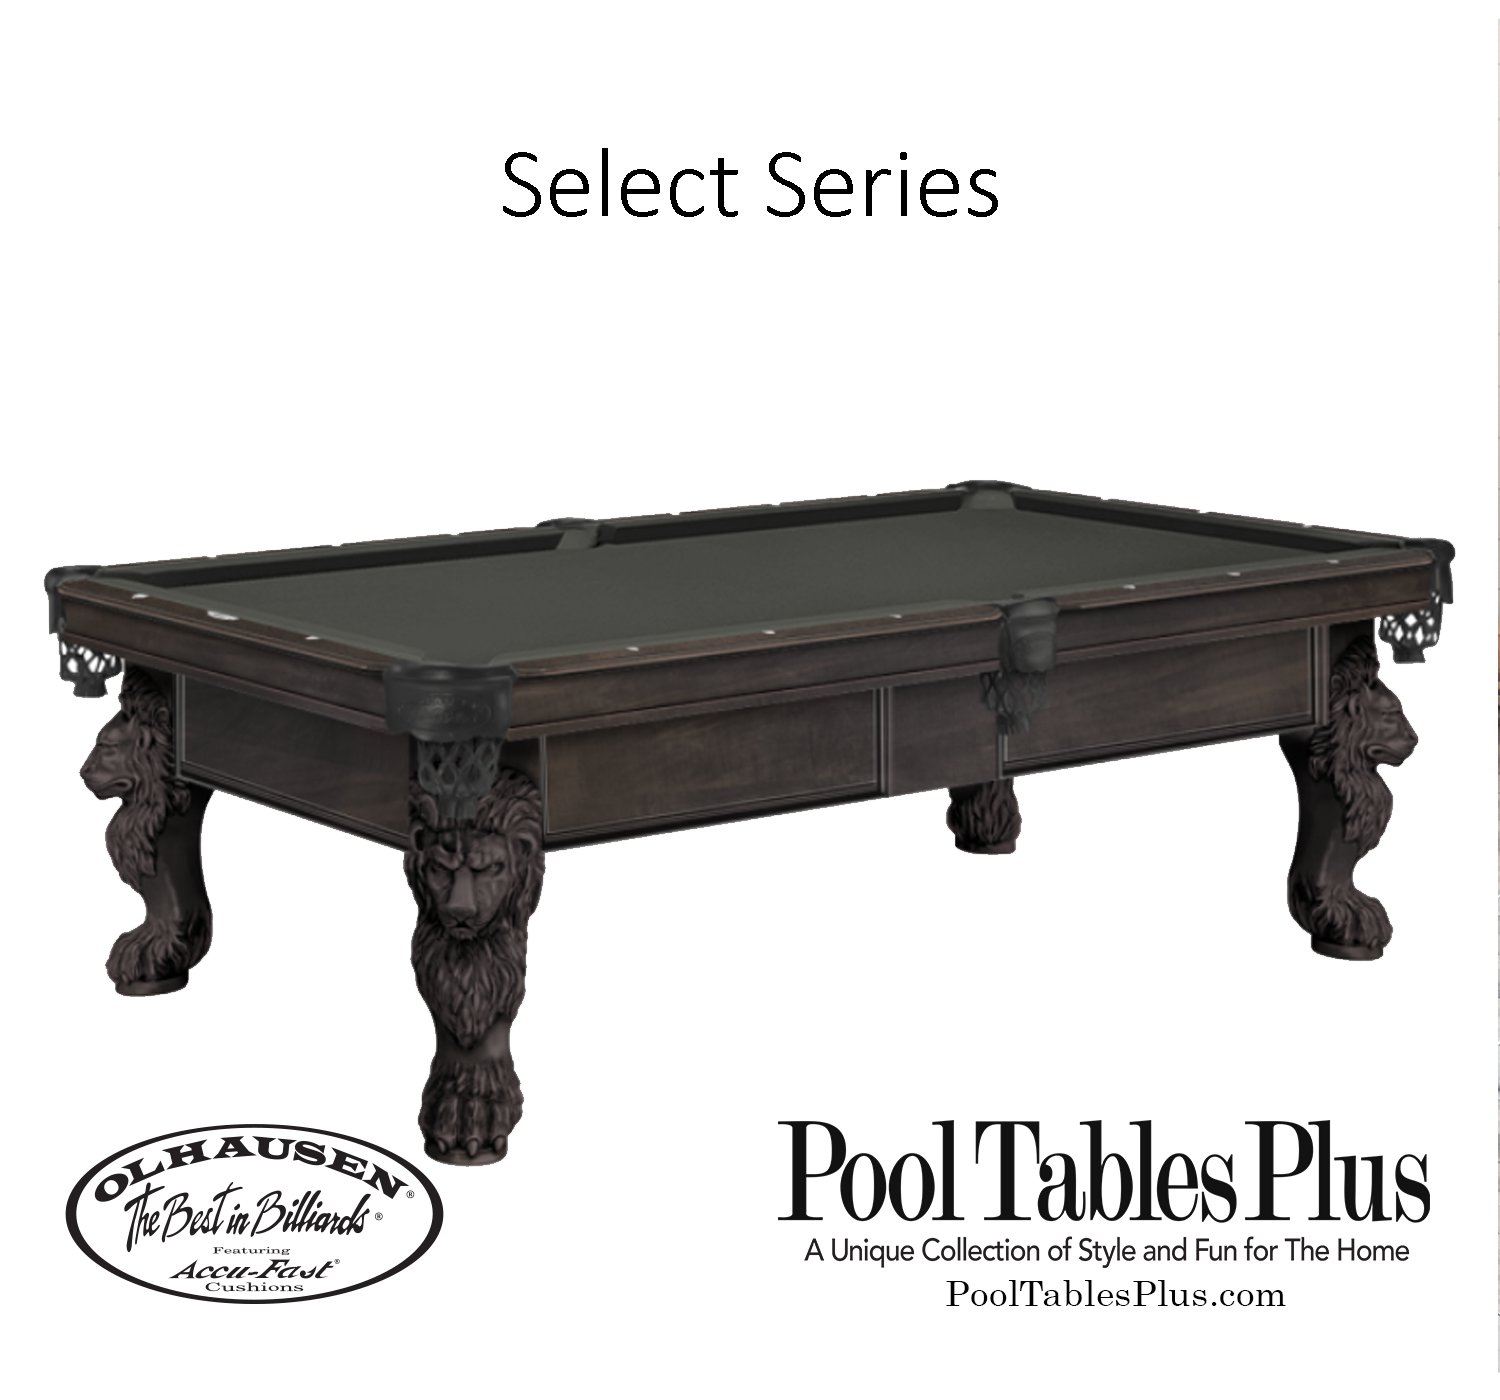 Olhausen St. George Pool Table-Shop Olhausen Pool Tables